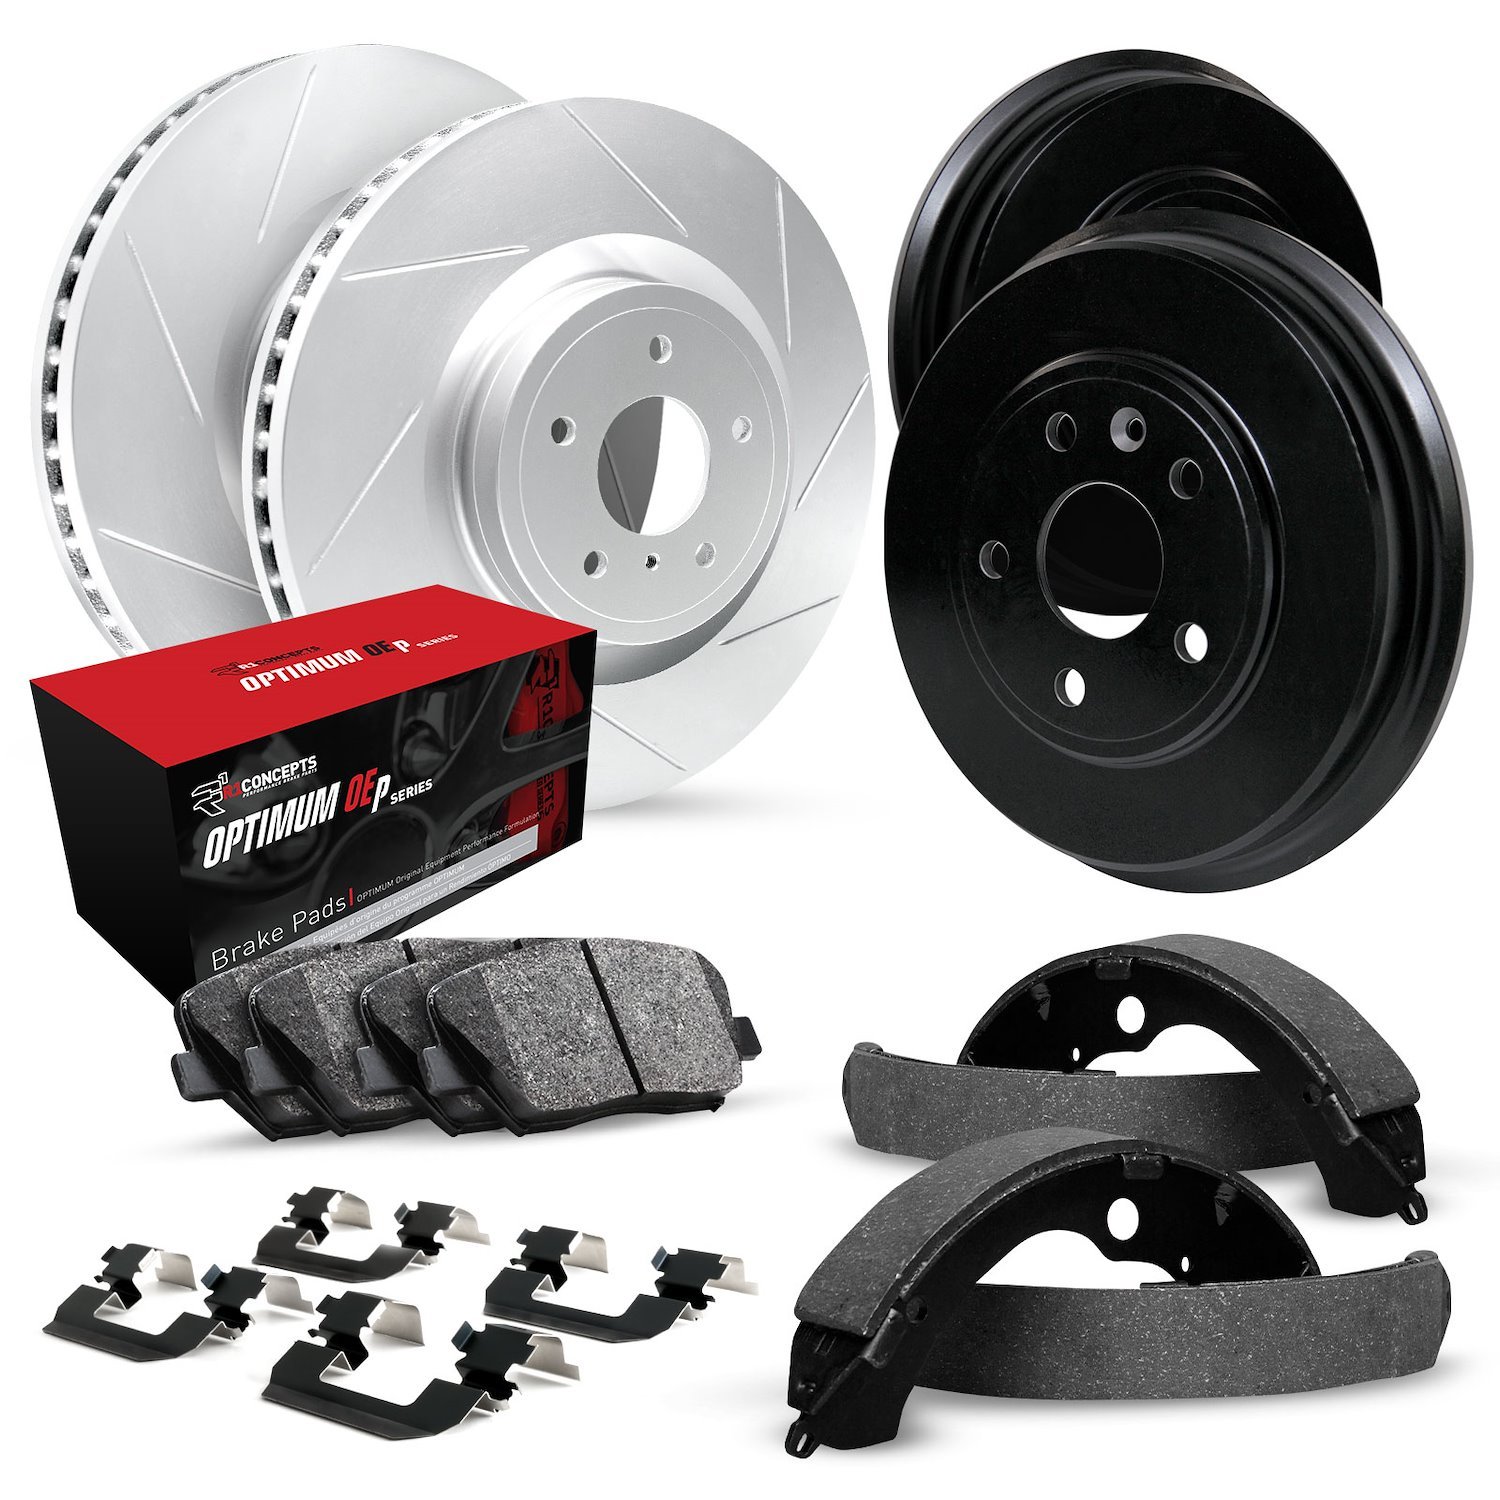 GEO-Carbon Slotted Brake Rotor & Drum Set w/Optimum OE Pads, Shoes, & Hardware, 1984-1984 GM, Position: Front & Rear